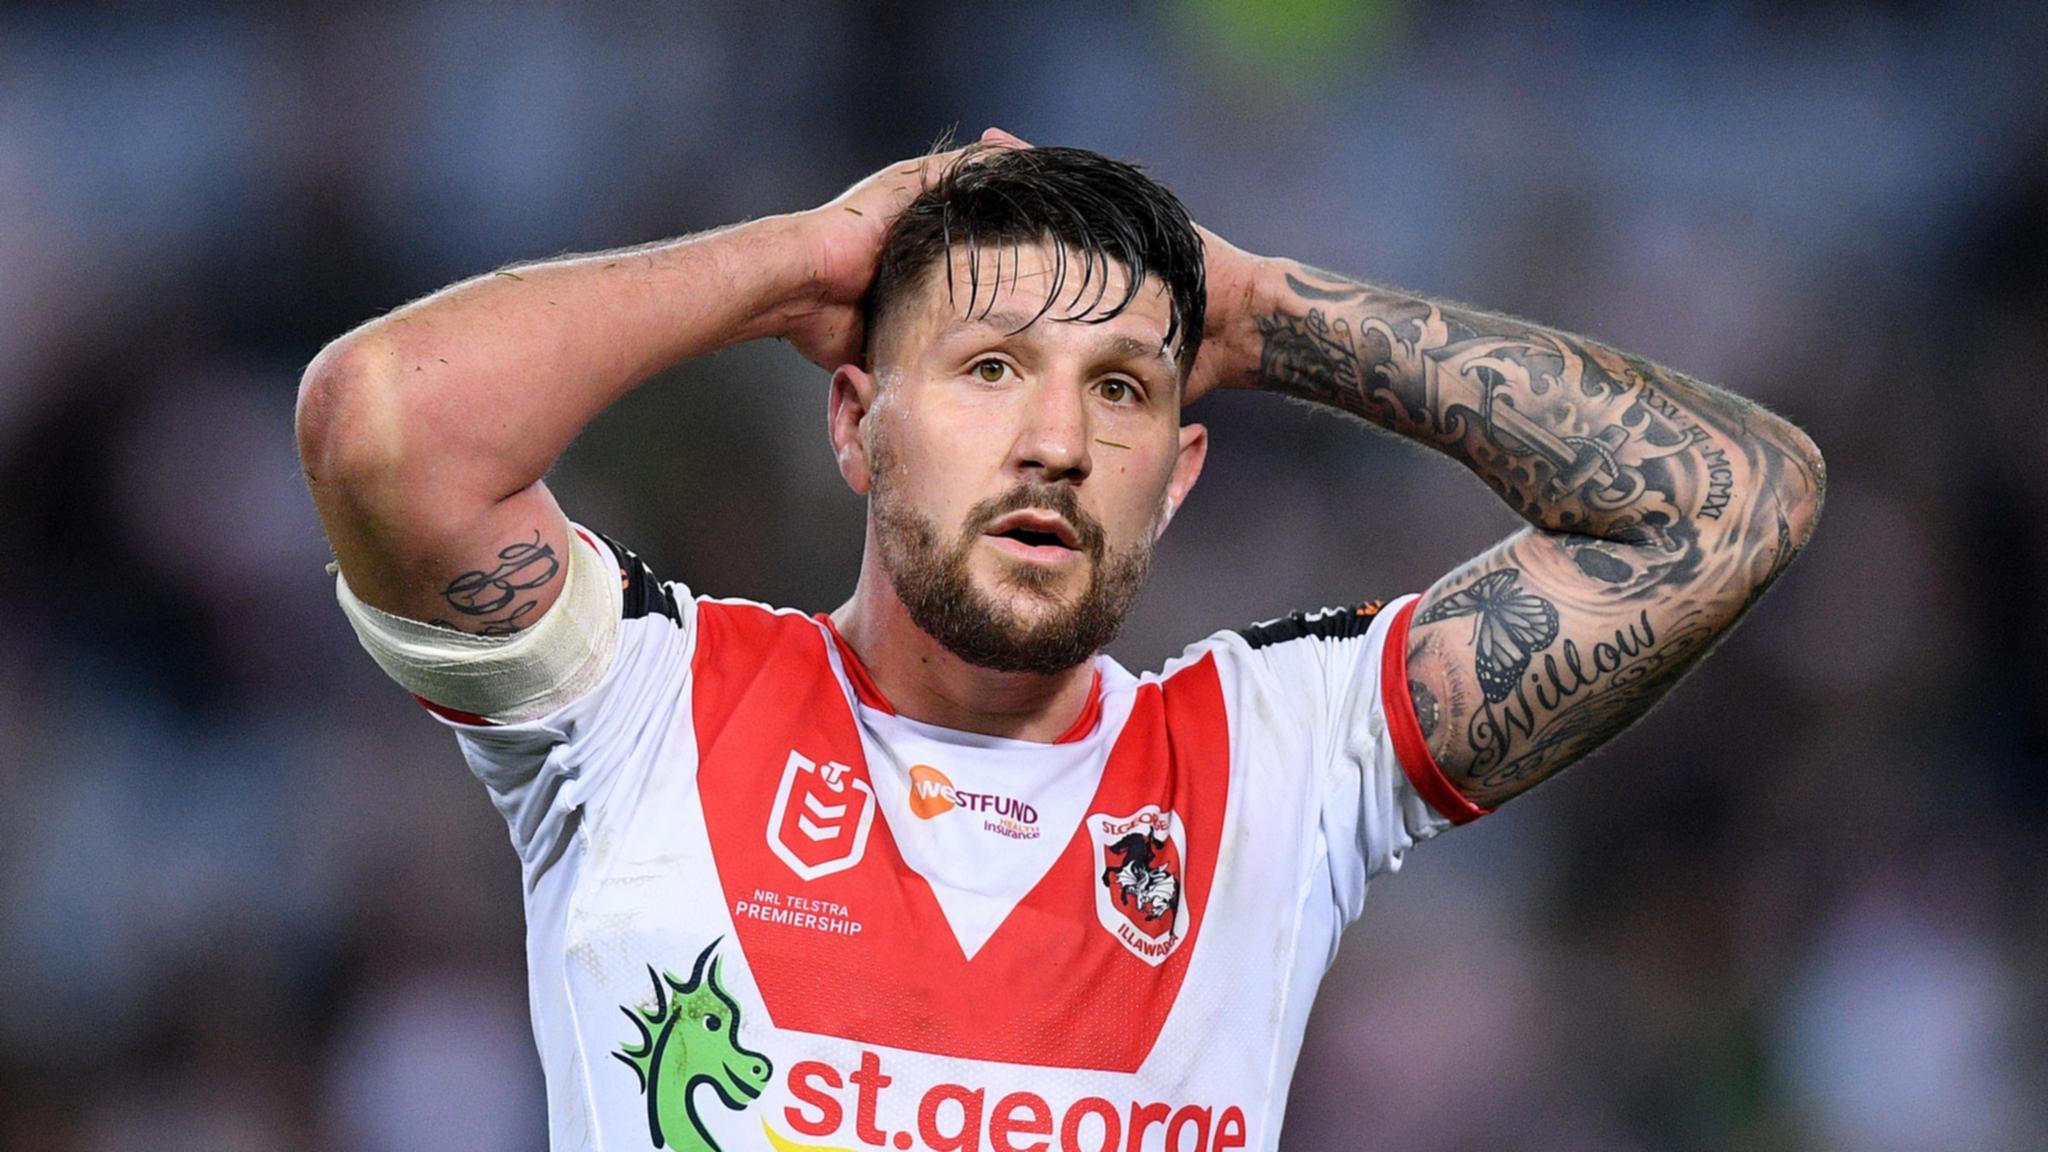 Widdop returning to NRL after lukewarm Super League stint: who signs the former Dragon?